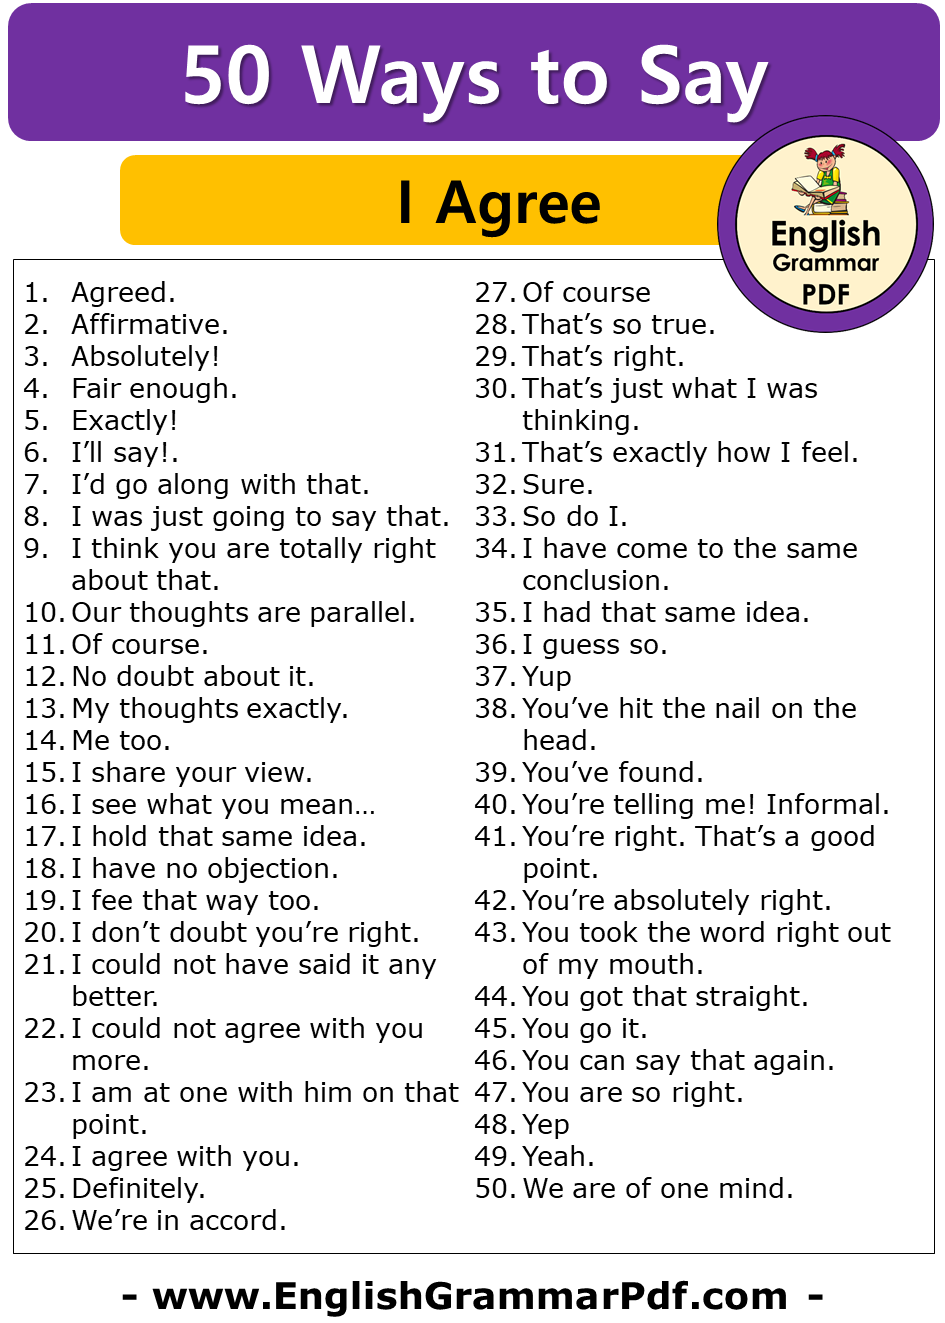 50 Other Ways To Say I Agree, English Phrases Examples